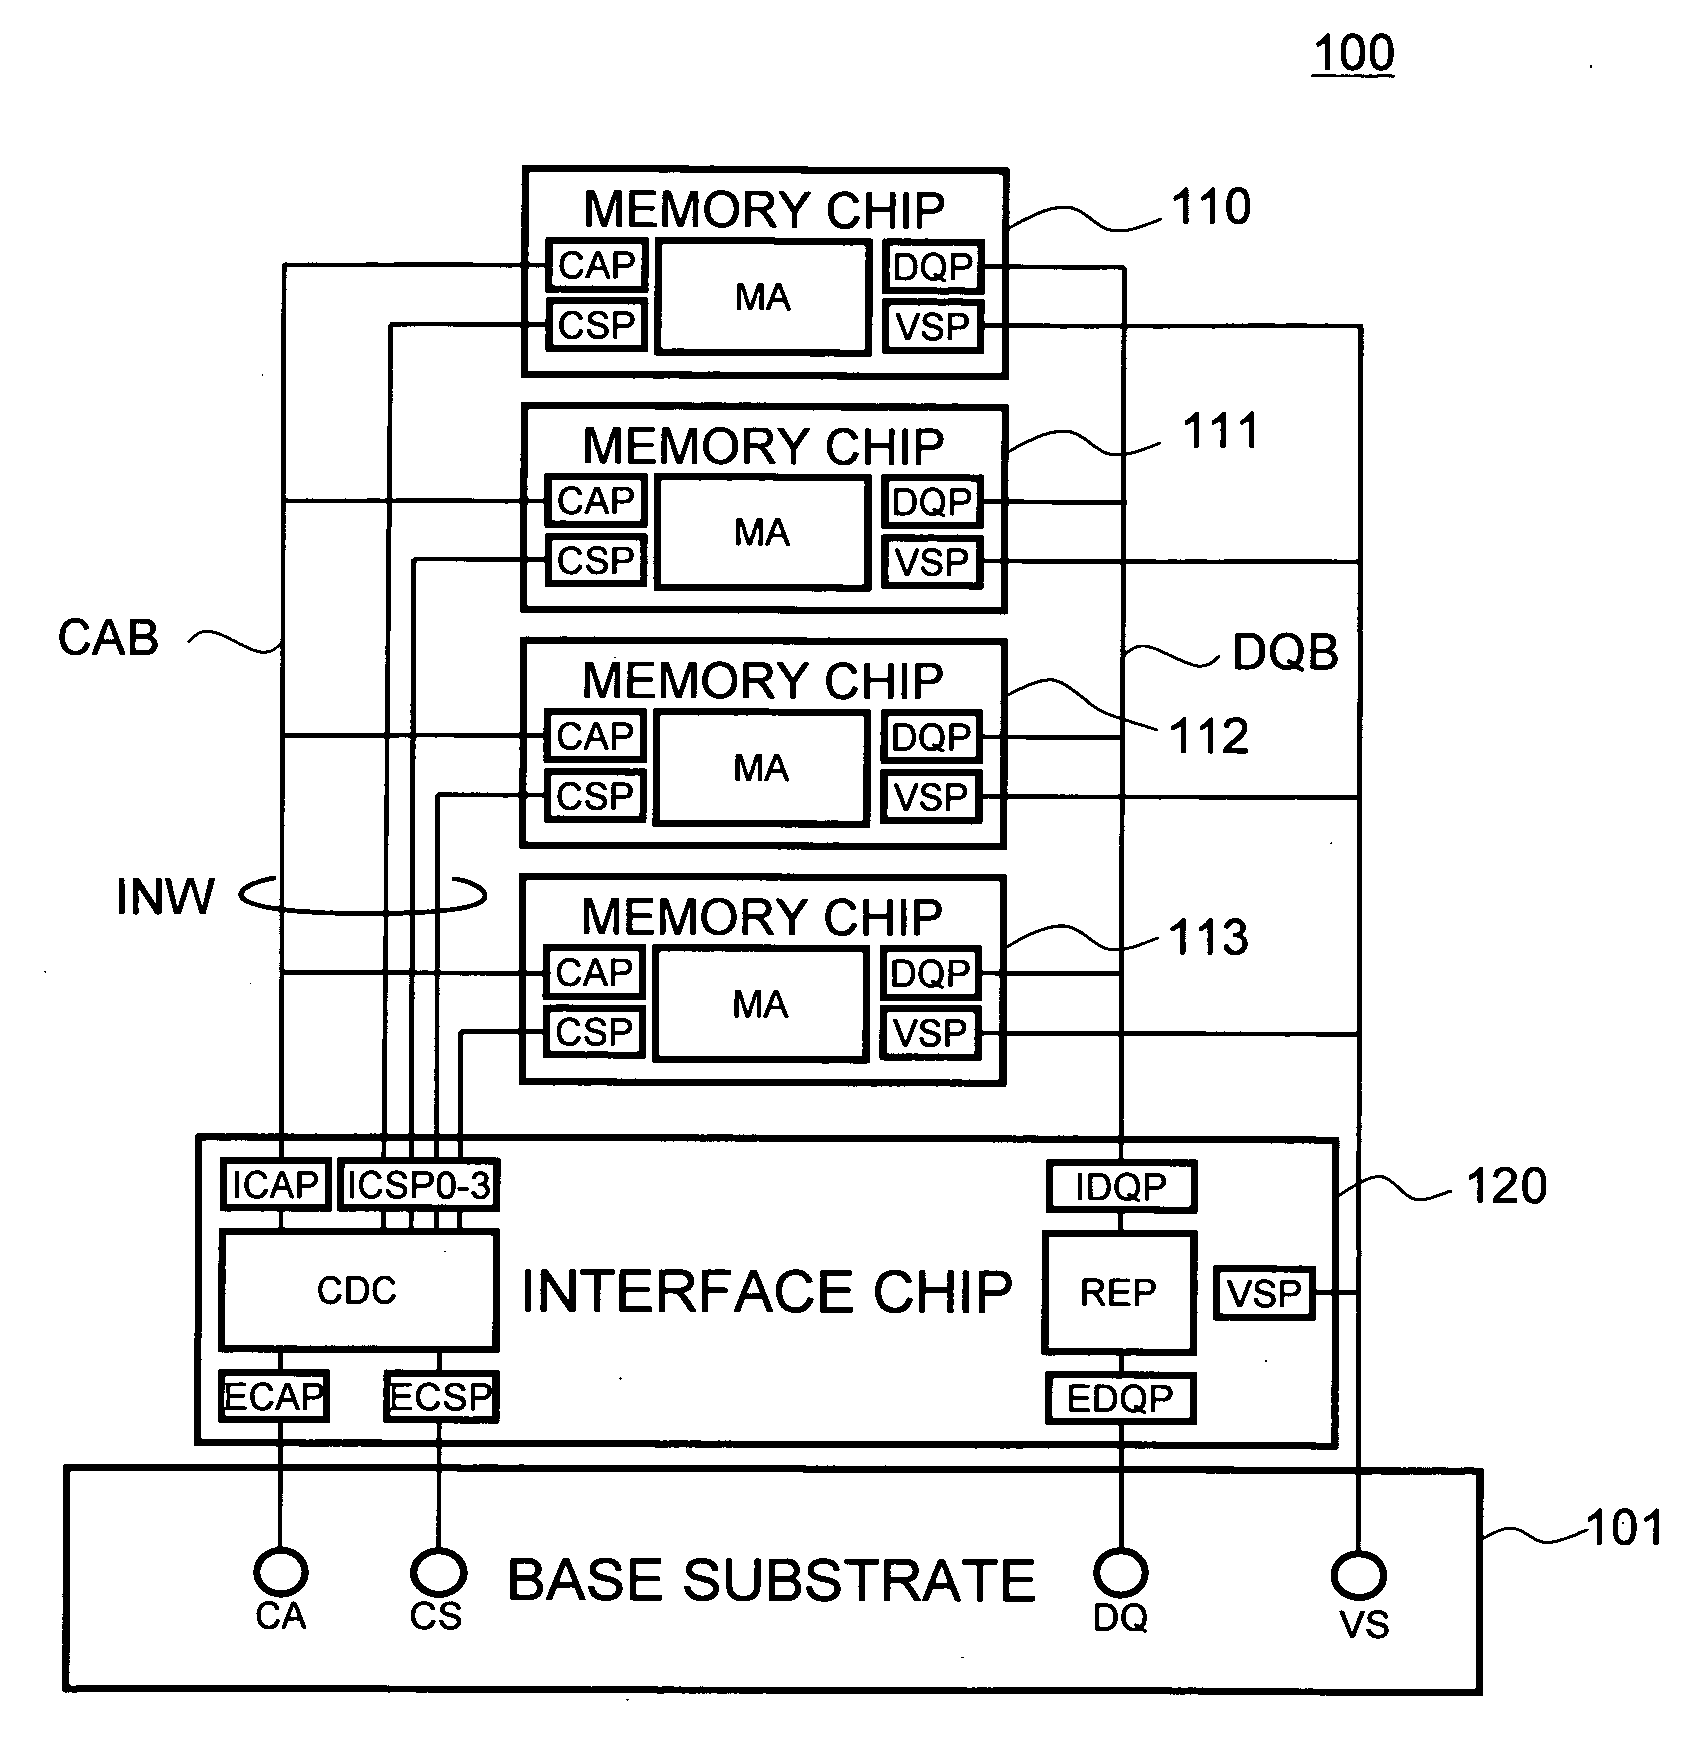 Semiconductor storage device having a plurality of stacked memory chips